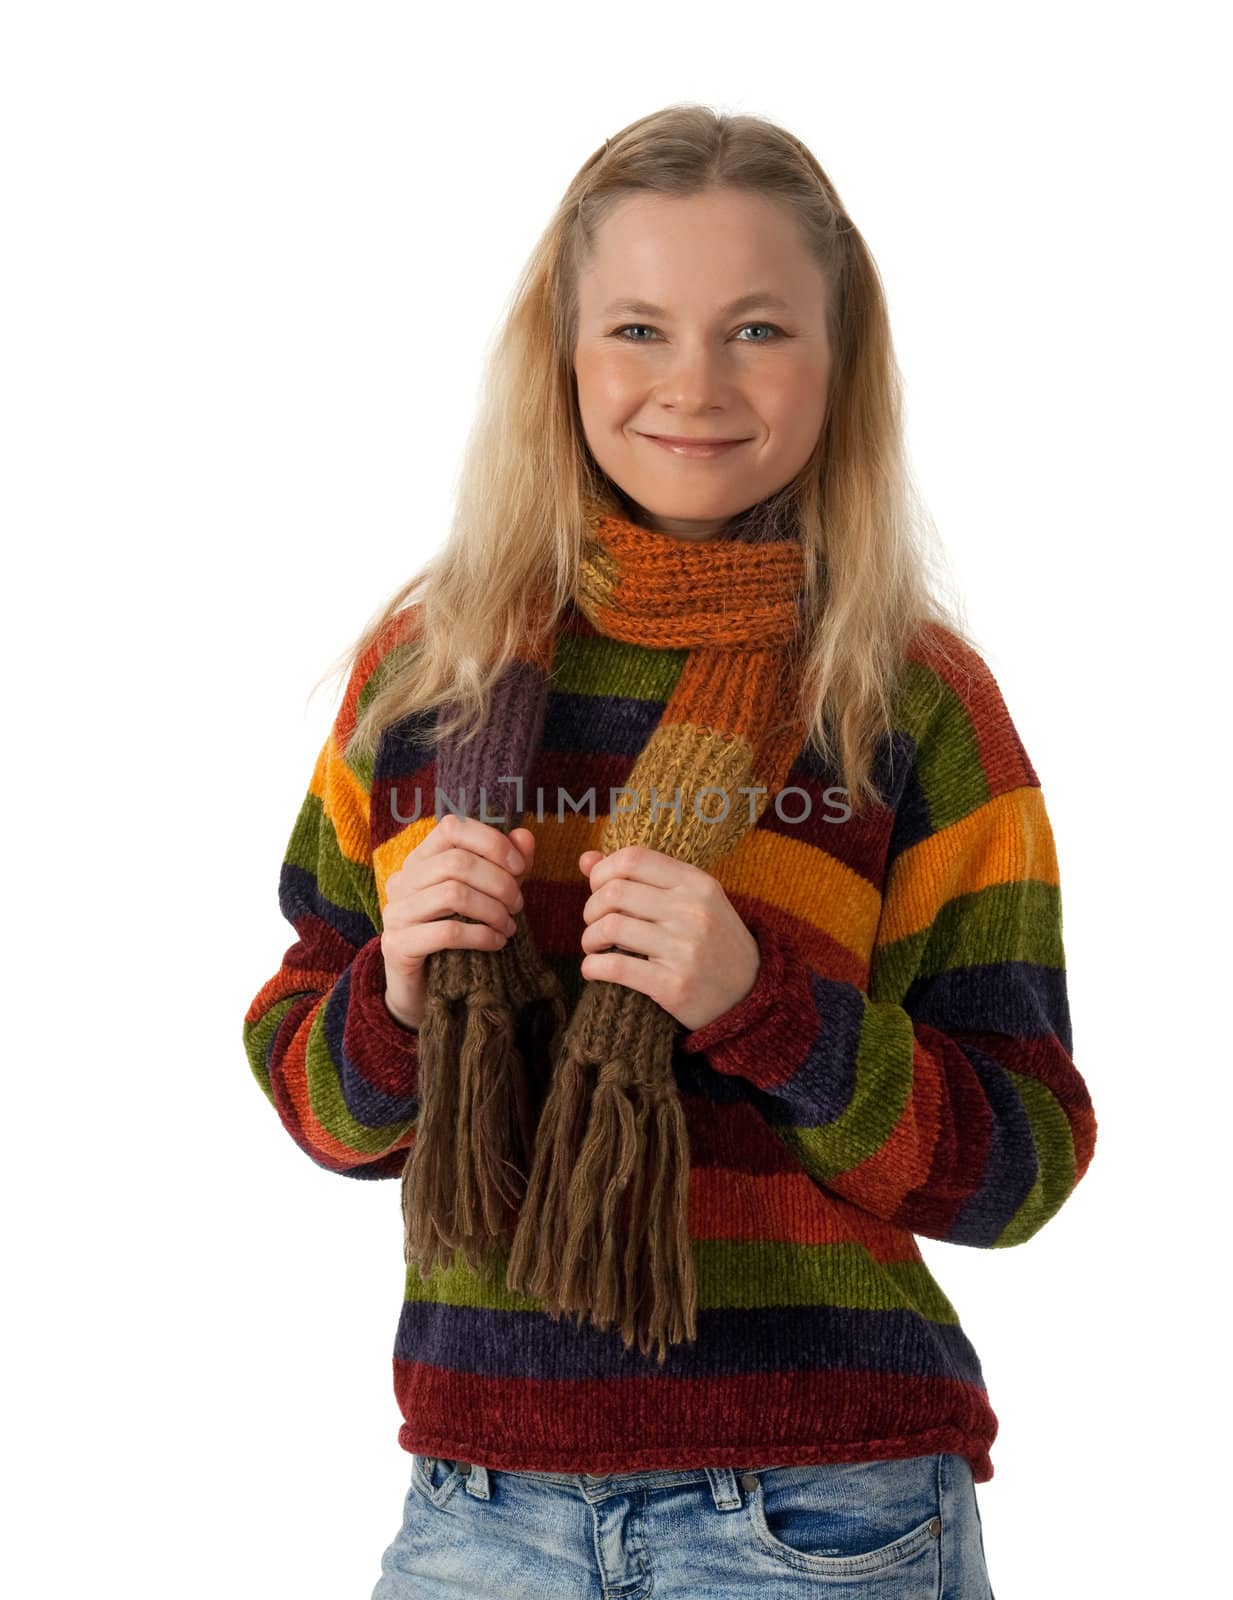 Smiling young woman wearing striped sweater by anikasalsera